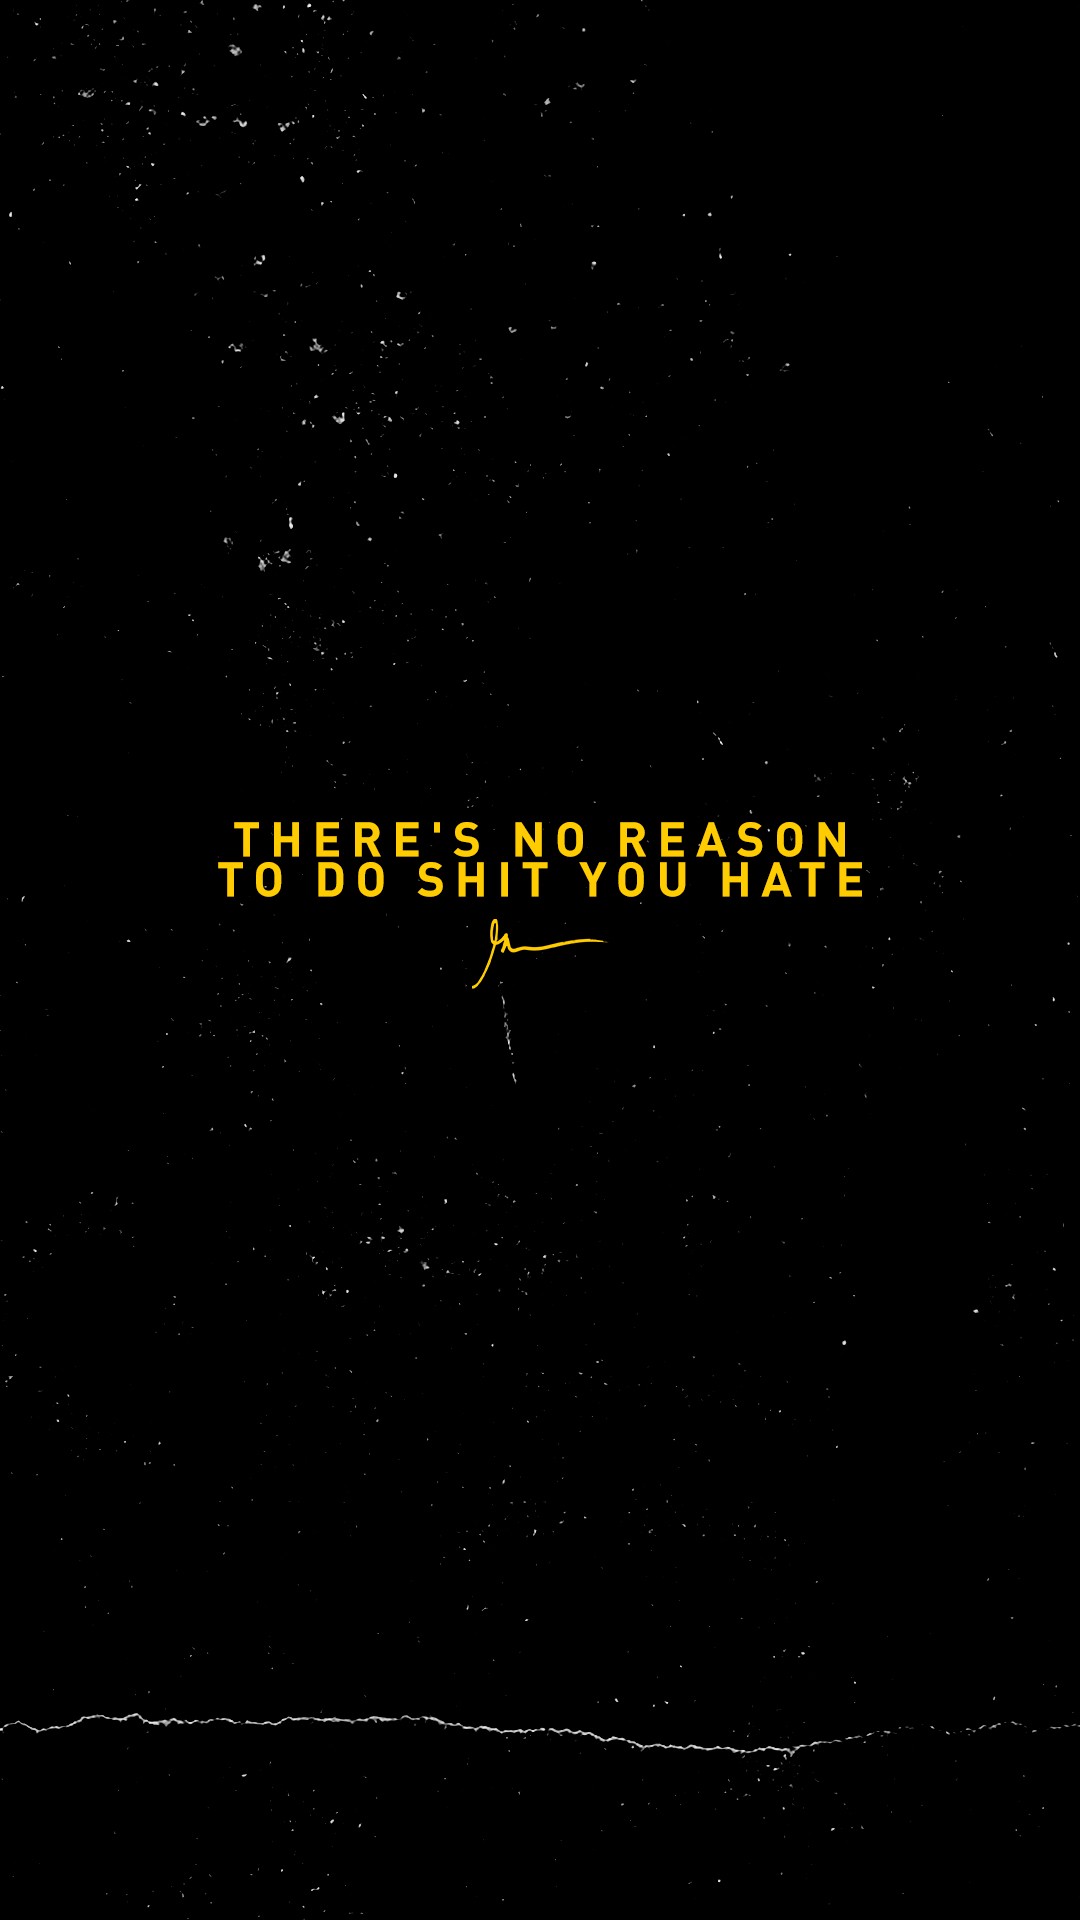 GaryVee WallPapers. Many of you have been asking me for the.